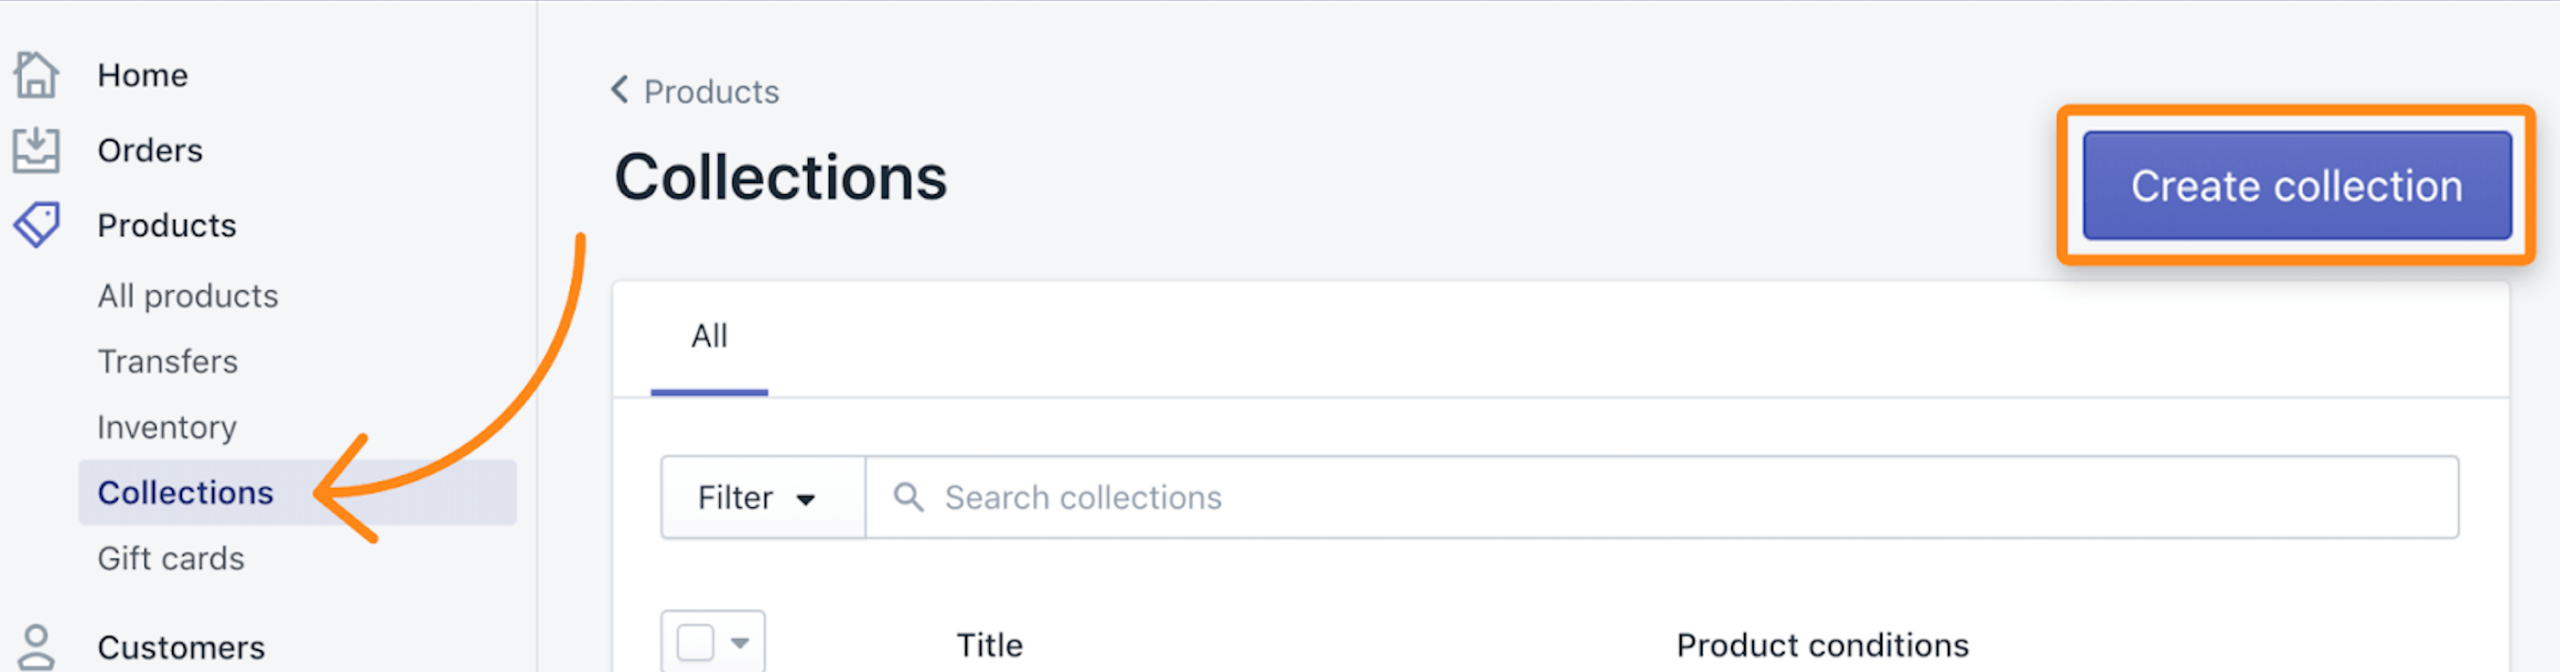 Shopify collections tab